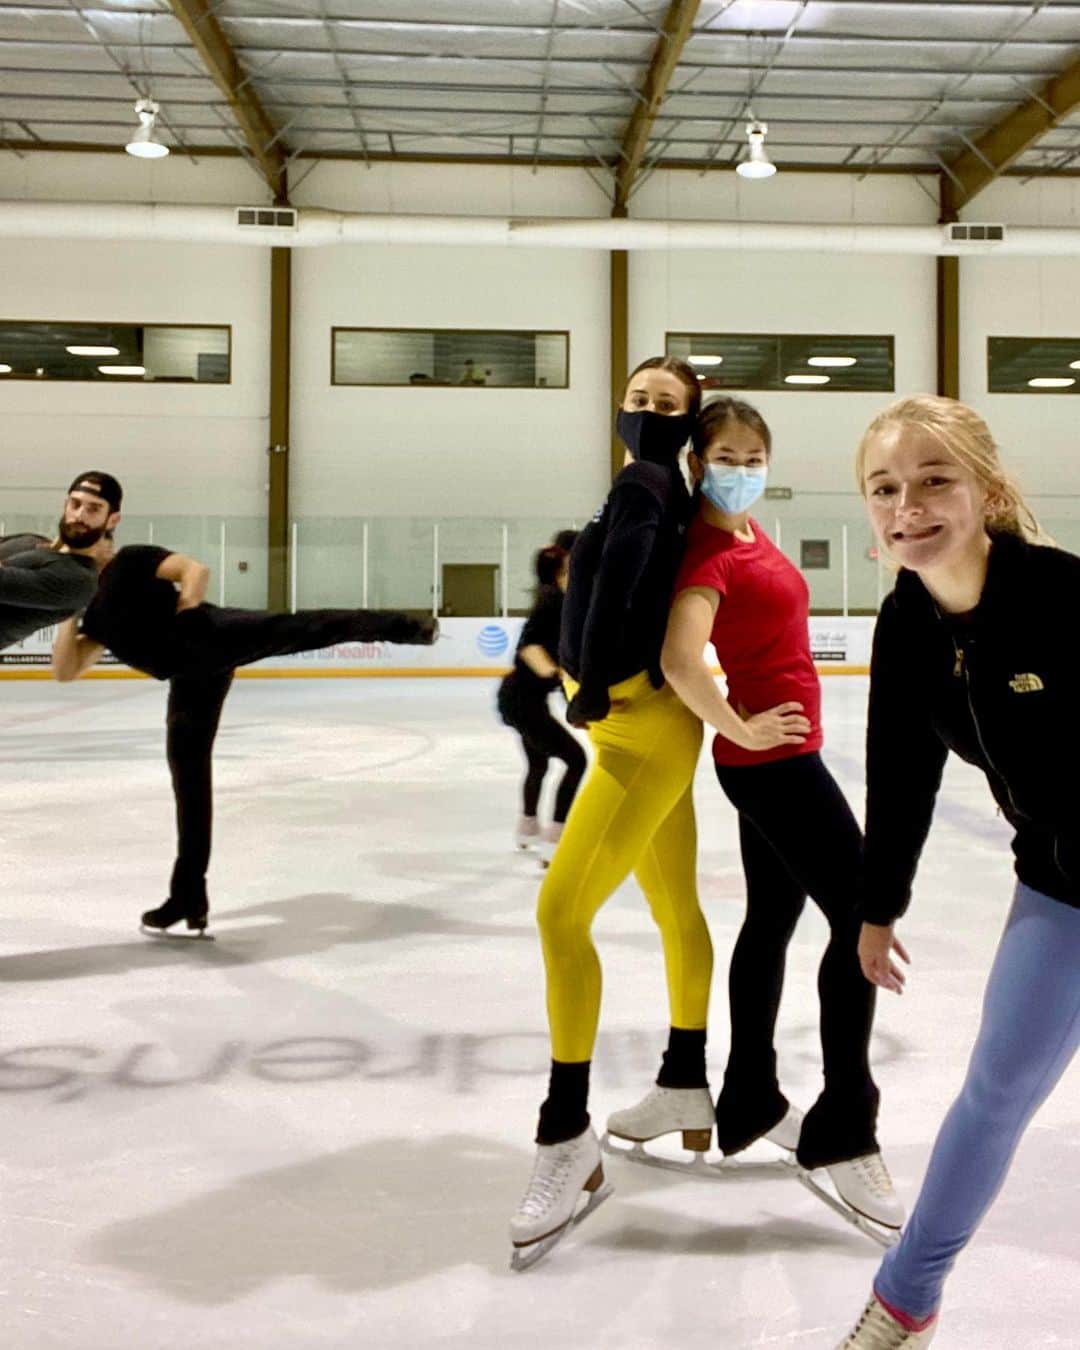 Rozinaのインスタグラム：「Honestly, thought of so many captions that I couldn’t decide so let me know which one is most fitting😂:  1. Spot the peculiarity  2. Your fav duo if we were condiments👯‍♀️❤️💛 @icegirlash   3. ❤️Ketchup and mustard💛  4. Planned to take a photo of two people, somehow ended up with 5? #familythings  5. What a bunch🤣  6. There are 5 people in this photo......or are there?」